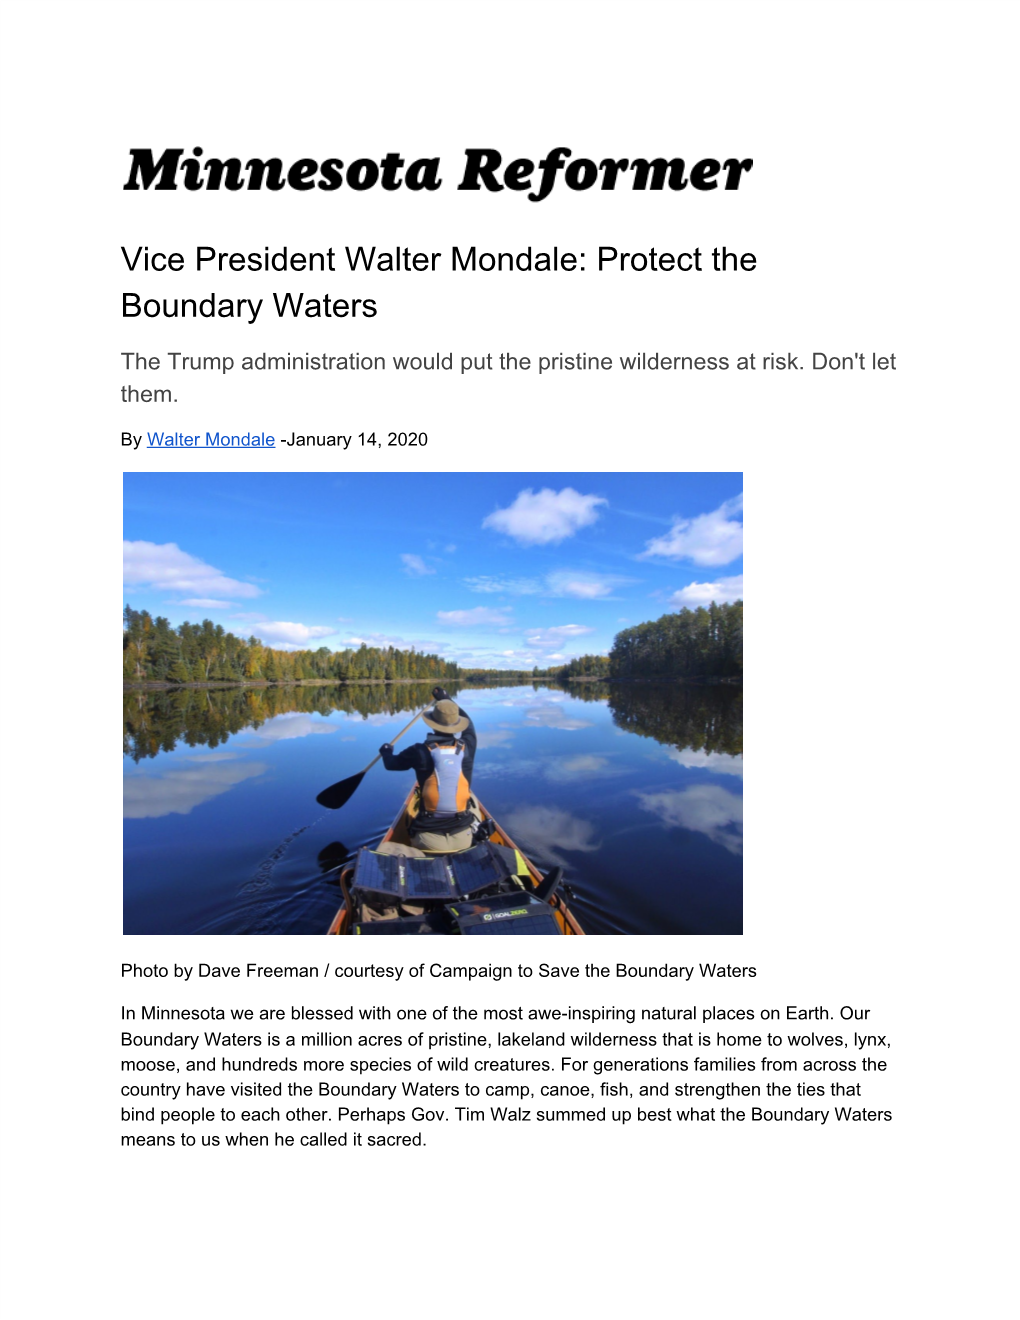 Vice President Walter Mondale: Protect the Boundary Waters